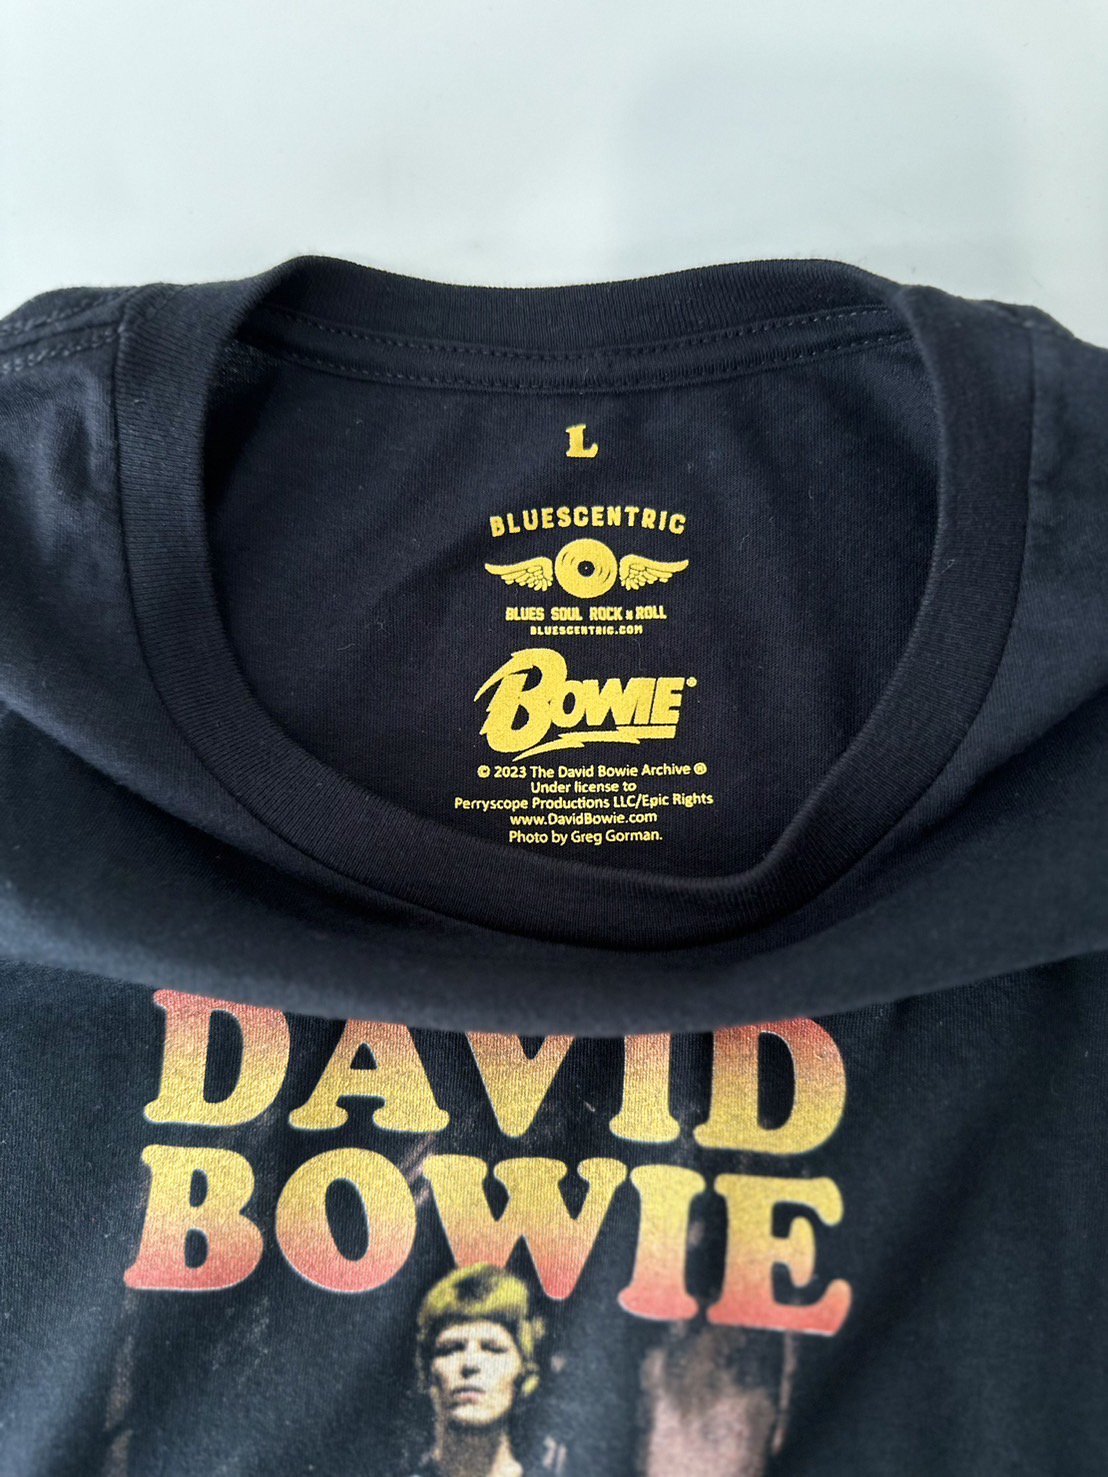 BLUESCENTRIC<br />DAVID BOWIE ZIGGY STARDUST  VINTAGE TEE / BLACK<img class='new_mark_img2' src='https://img.shop-pro.jp/img/new/icons47.gif' style='border:none;display:inline;margin:0px;padding:0px;width:auto;' />